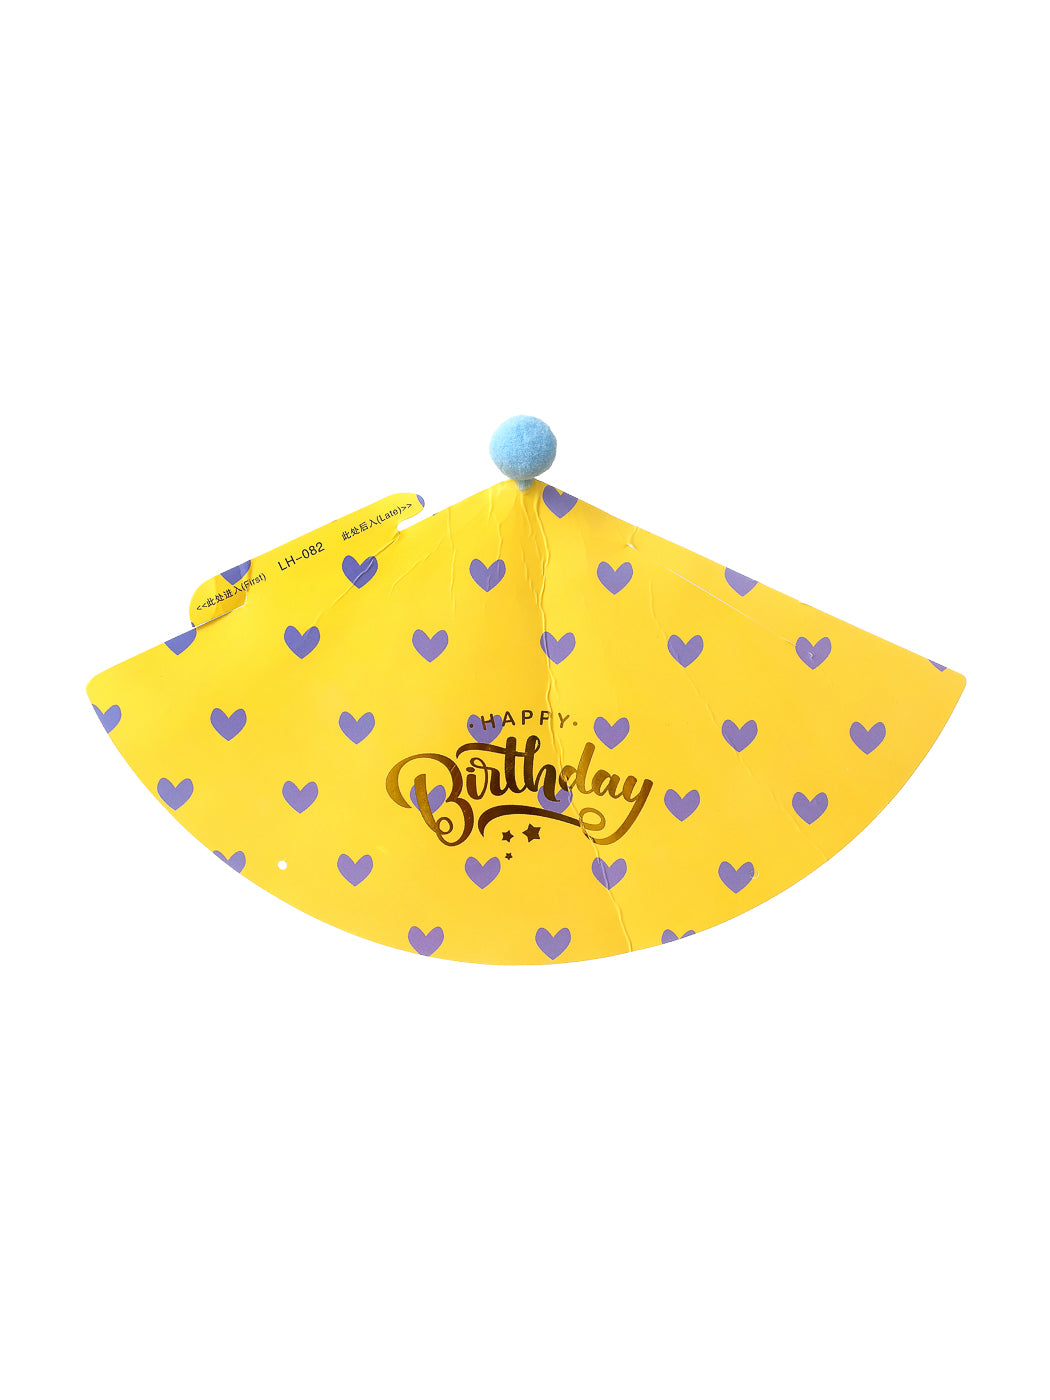 MINISO BIRTHDAY PARTY HAT(YELLOW, HEART) 2010879915105 PARTY DECORATIONS